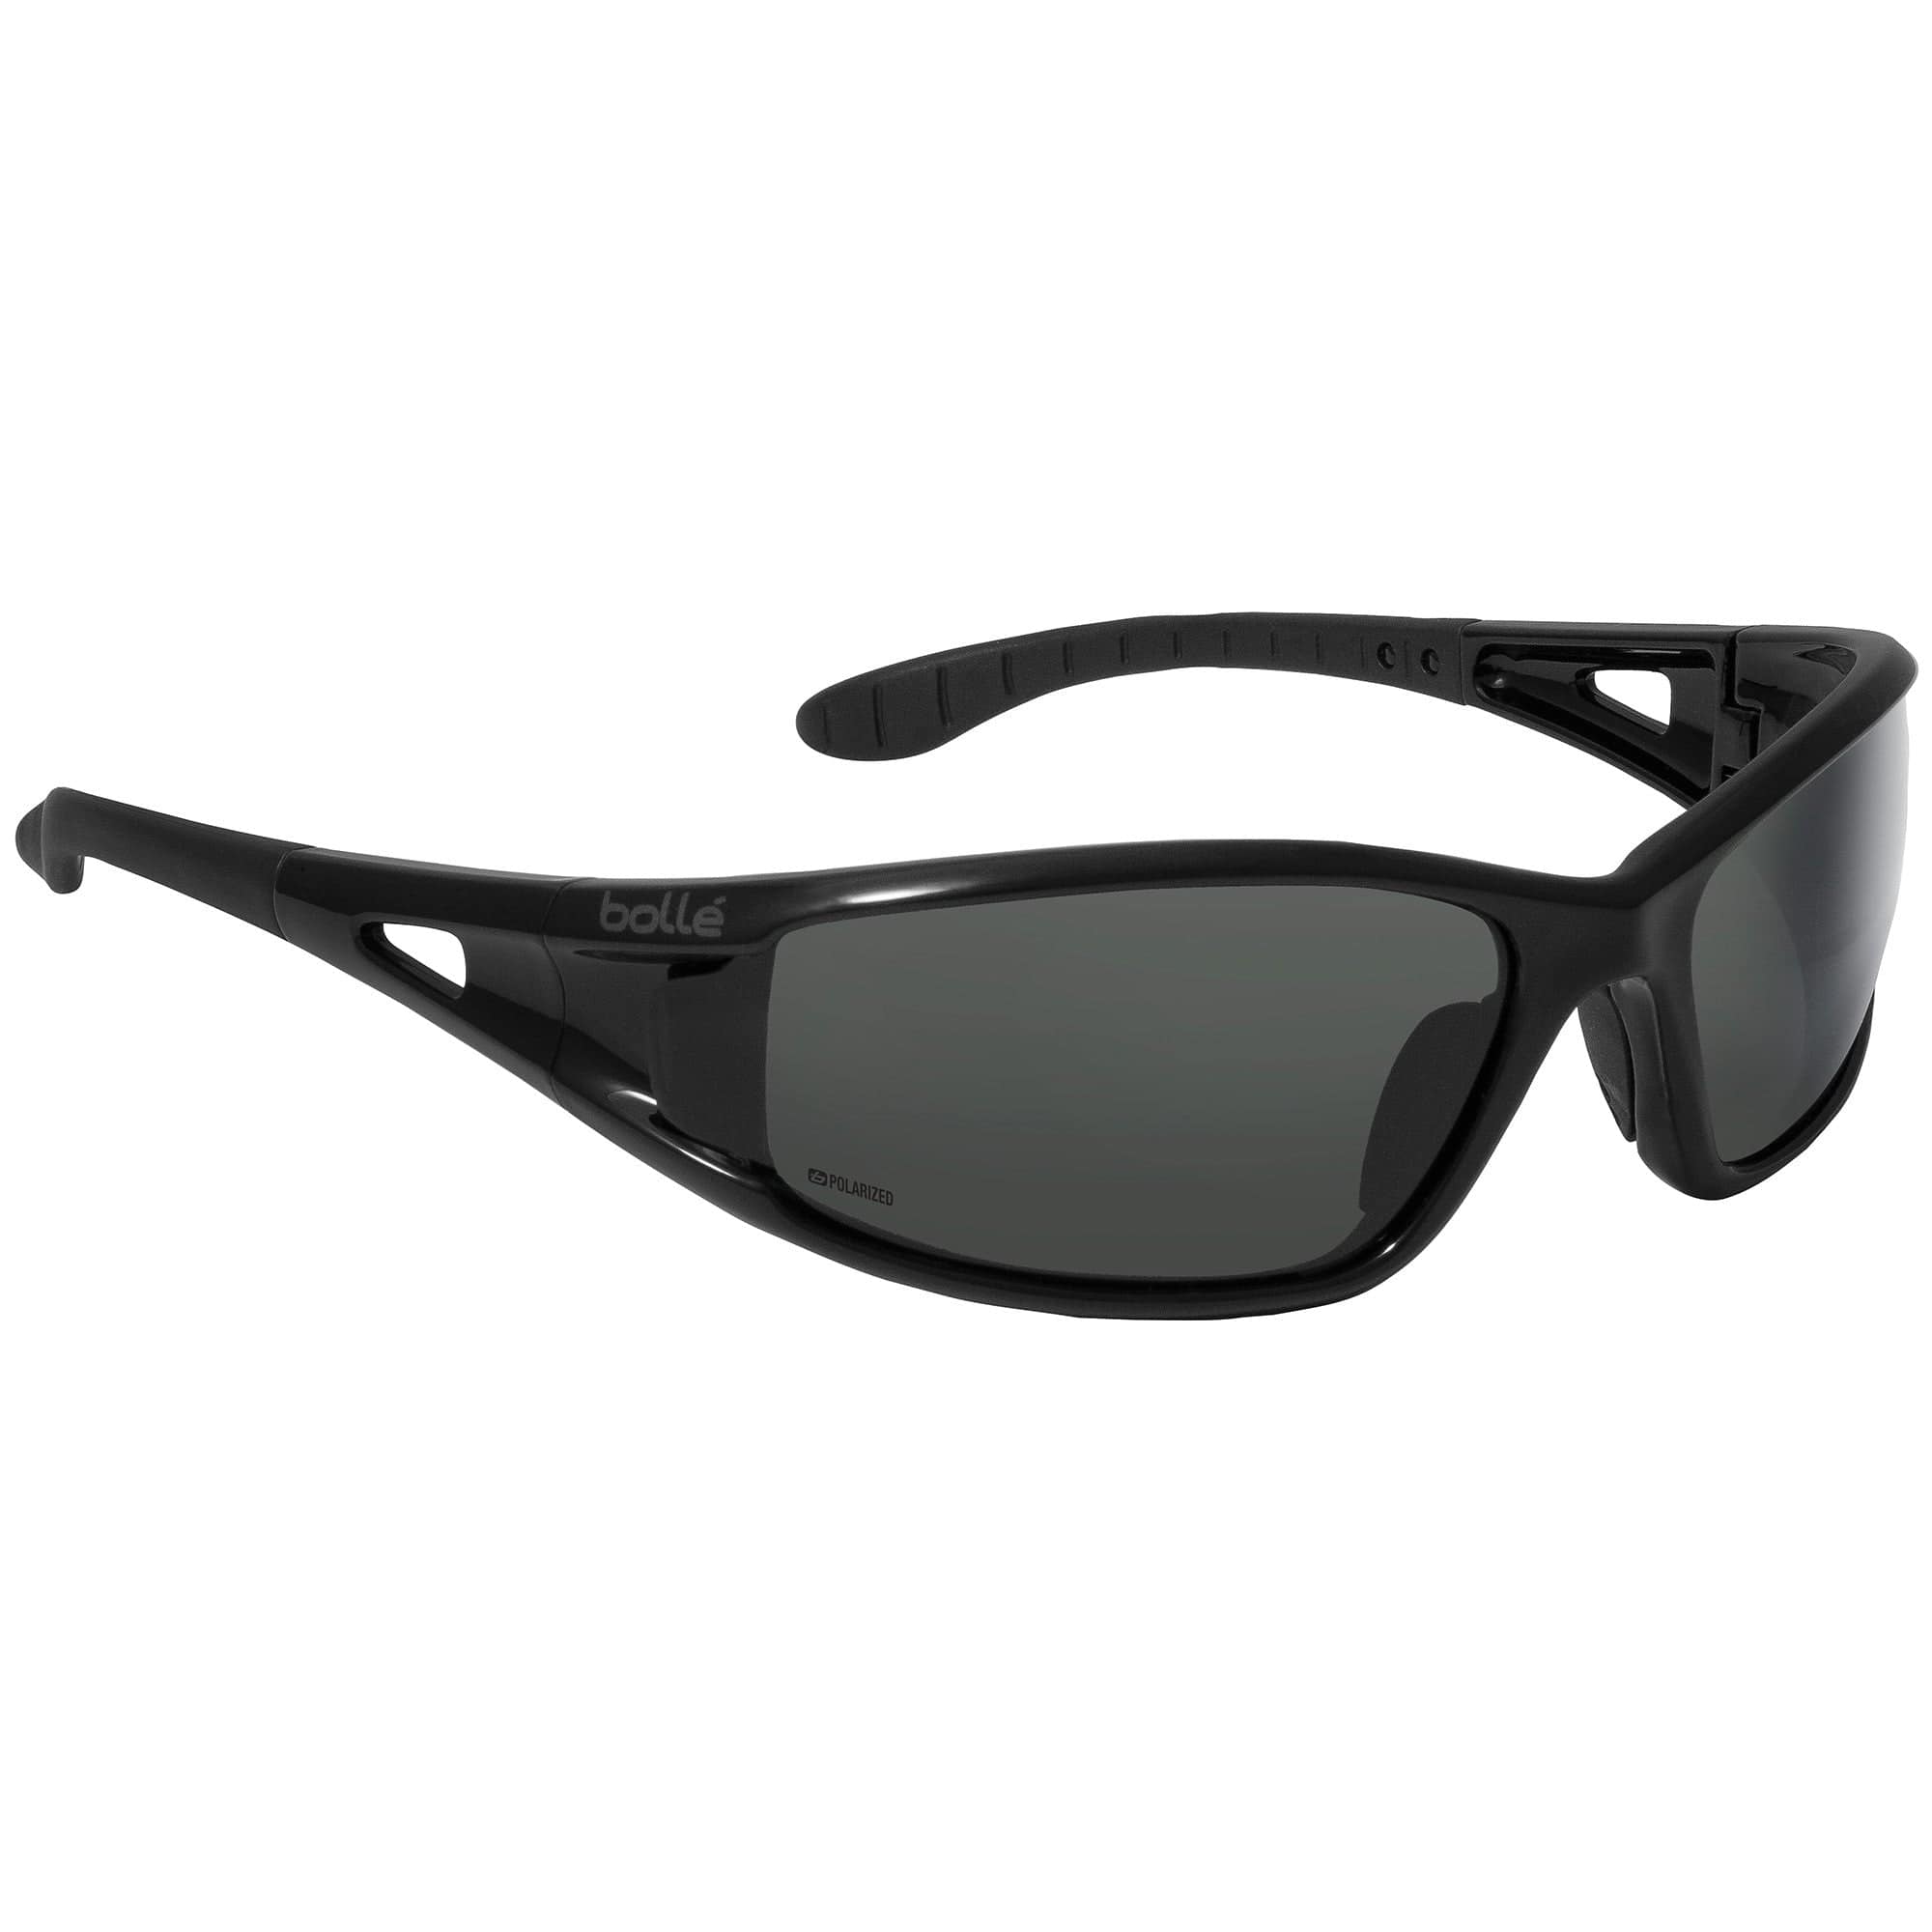 Bolle Lowrider Safety Glasses with Shiny Black Frame and Polarized Smoke Lenses